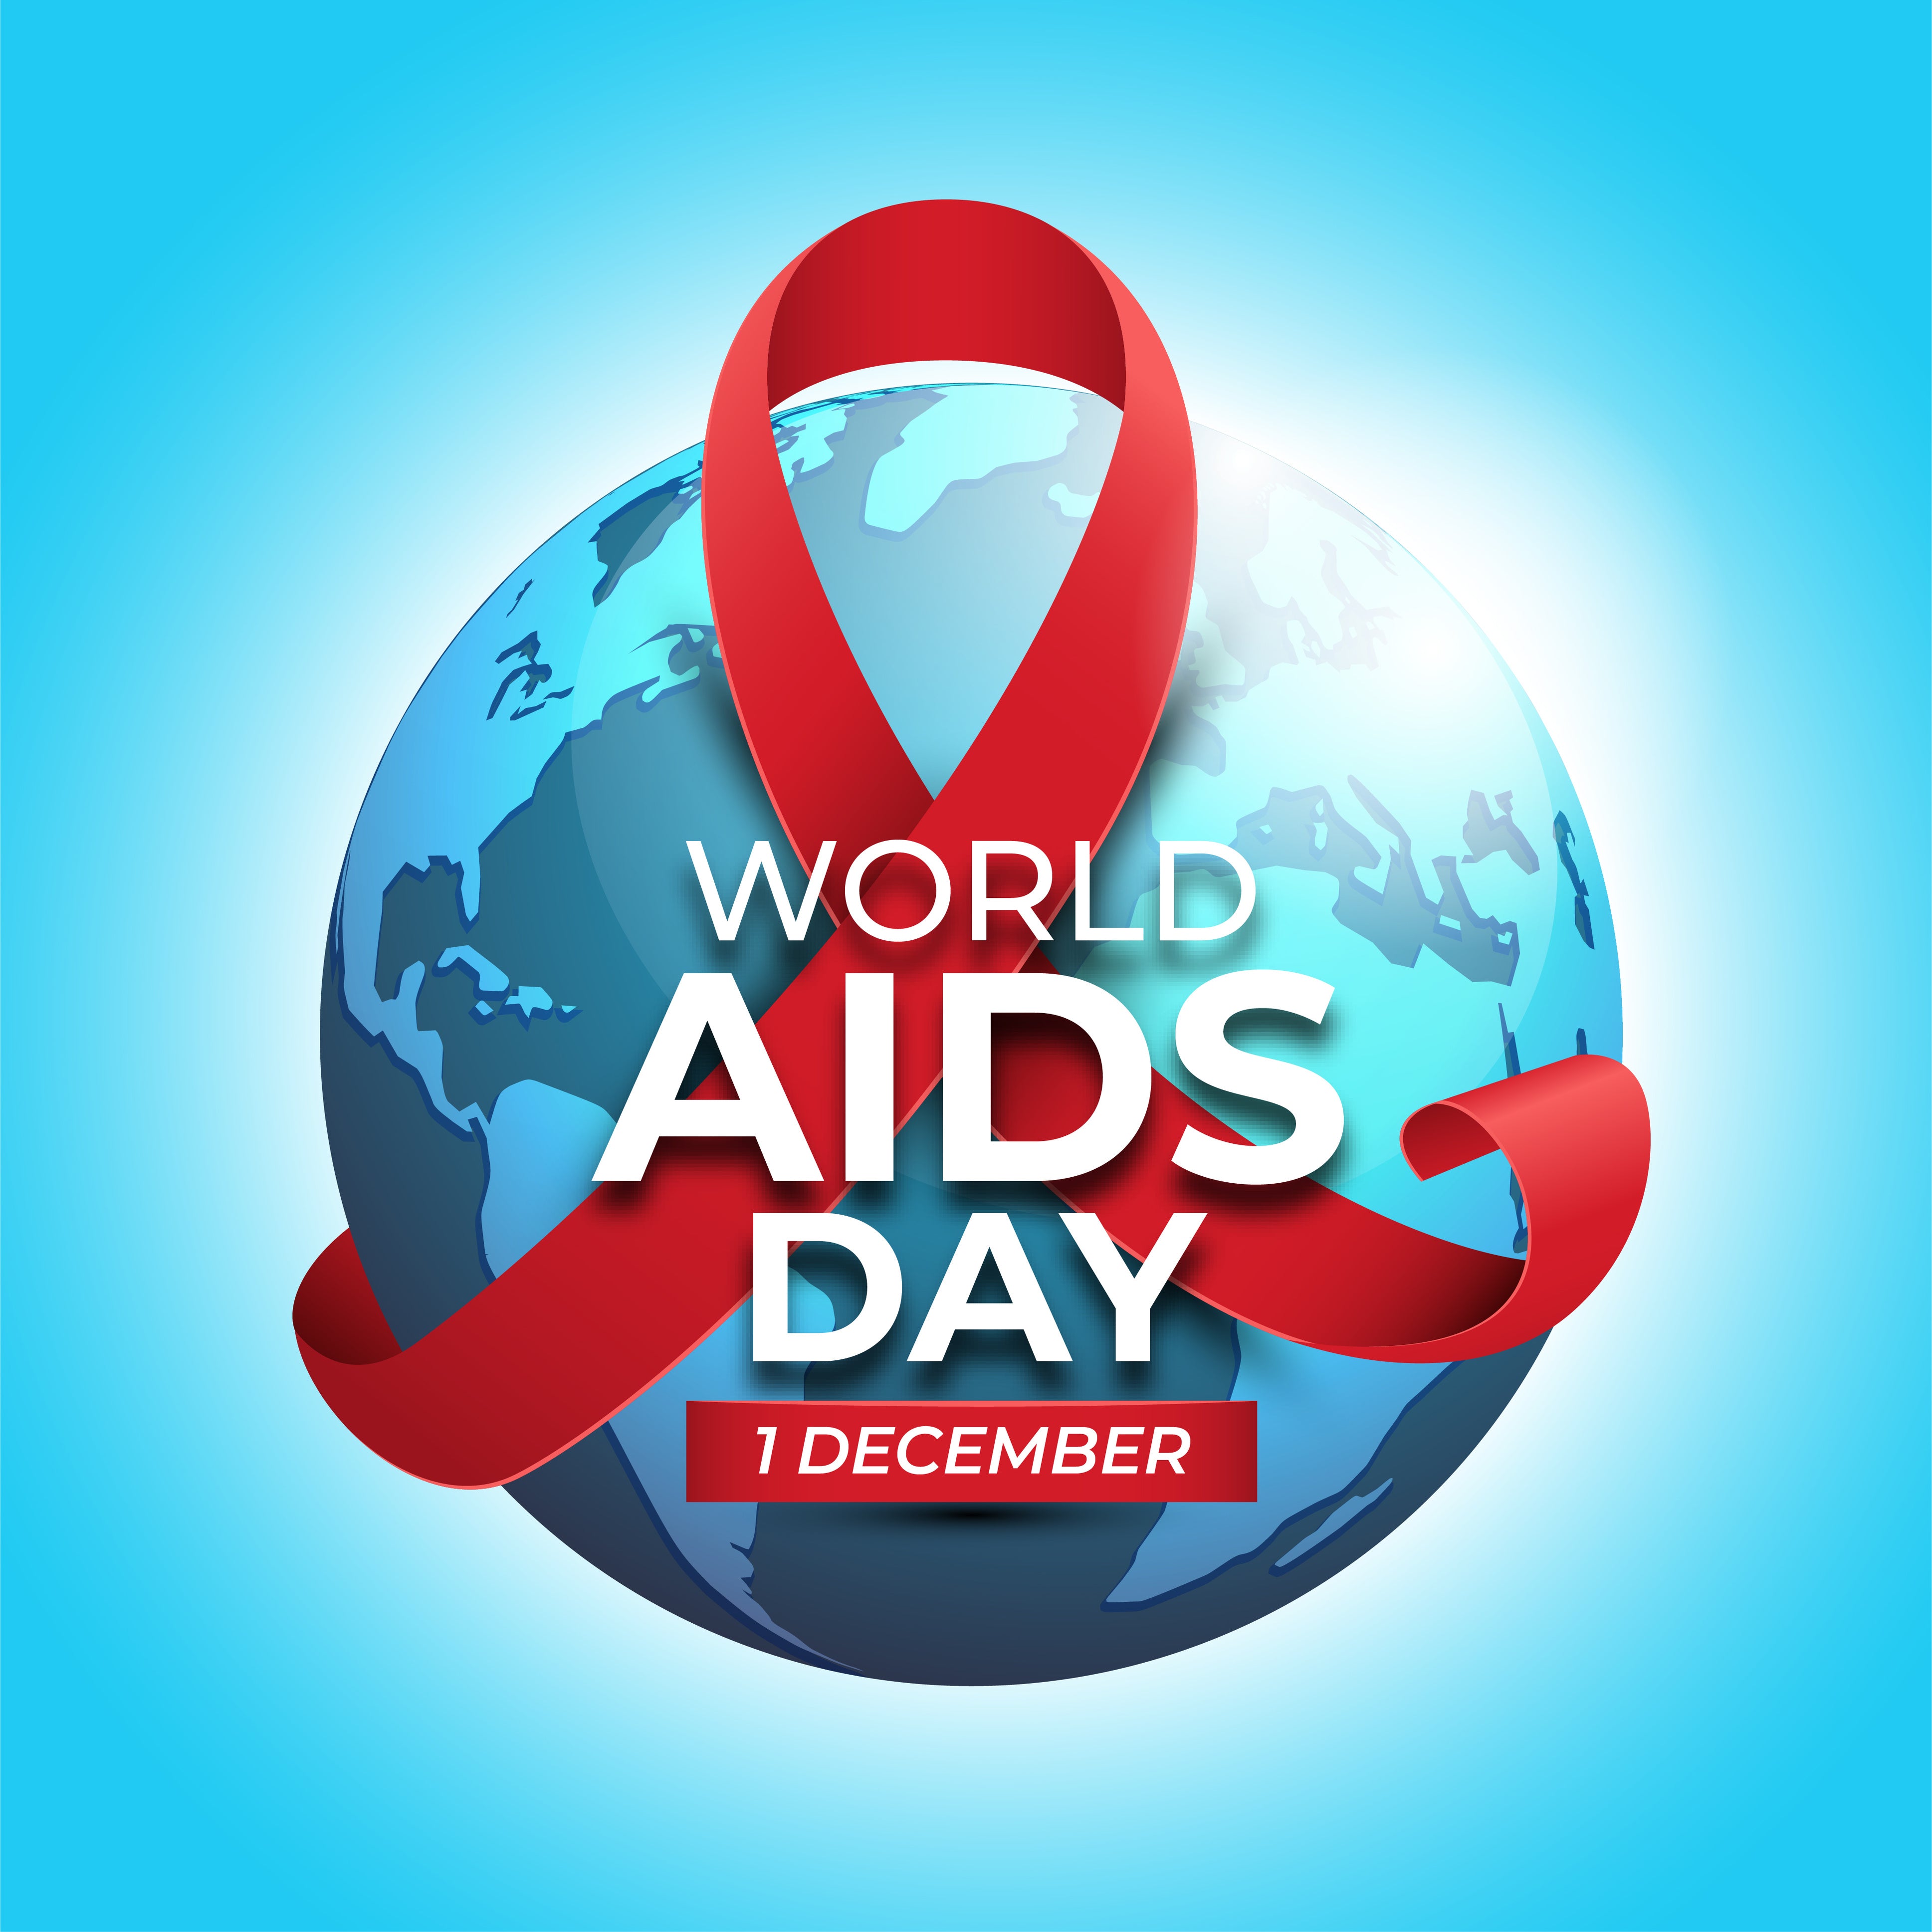 World AIDS Day: Progress, Challenges, and Hope